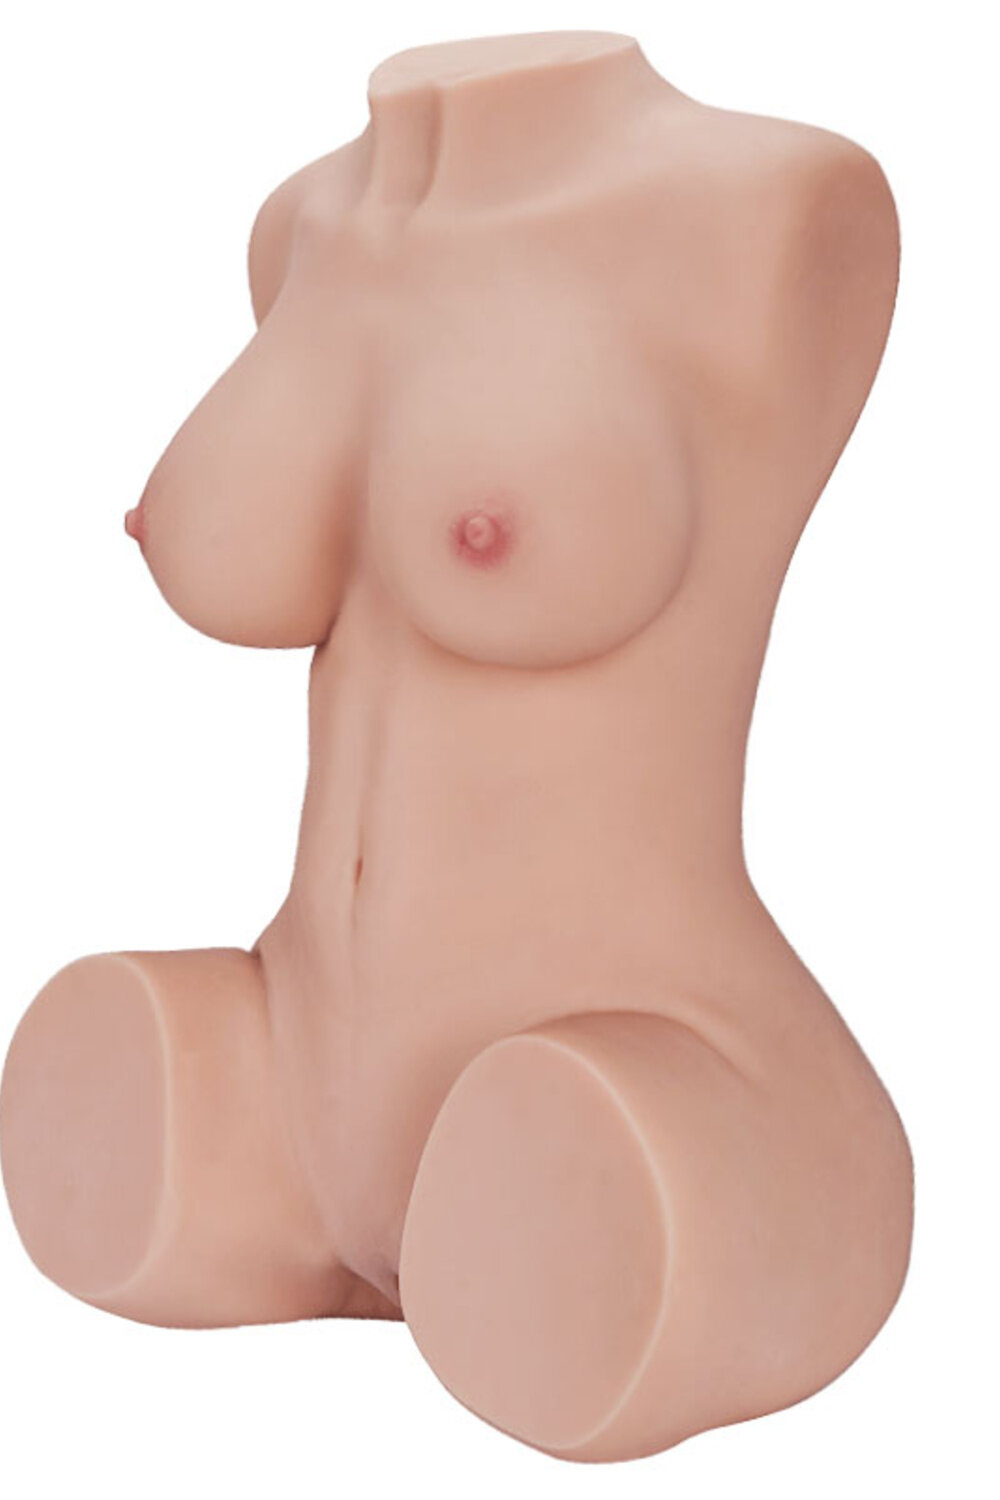 Maleigha 58cm(1ft11) H-Cup Tantaly Real Sex Doll (In Stock) image7